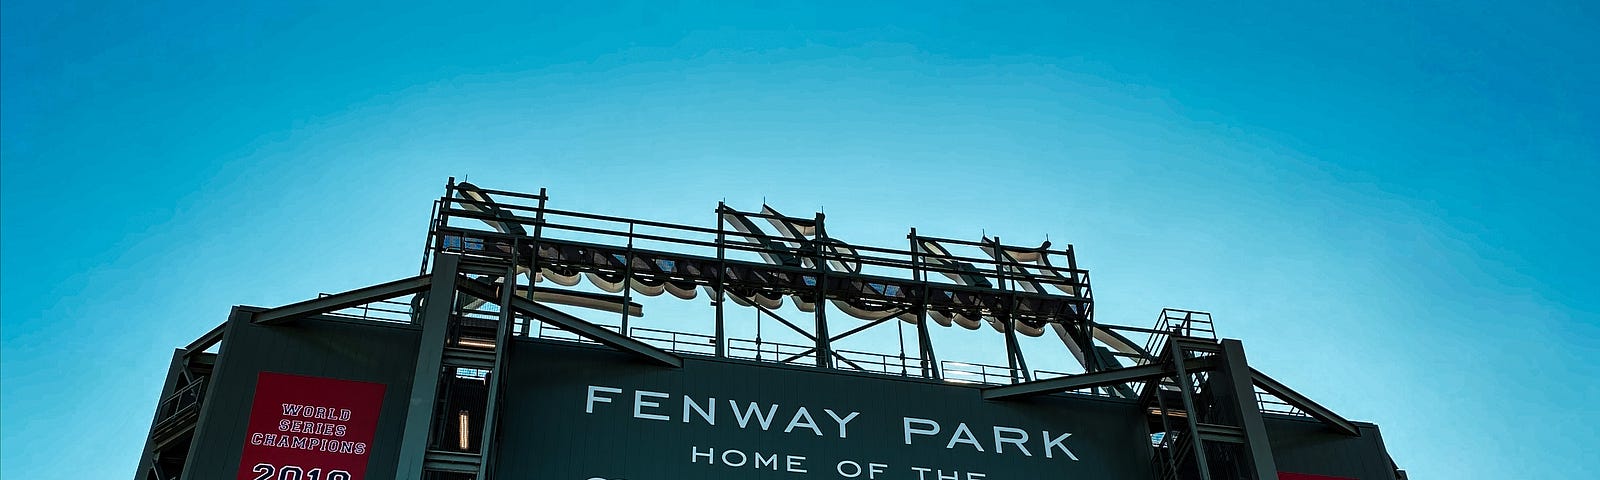 This street view of Fenway Park induces nausea in Yankees fans worldwide.